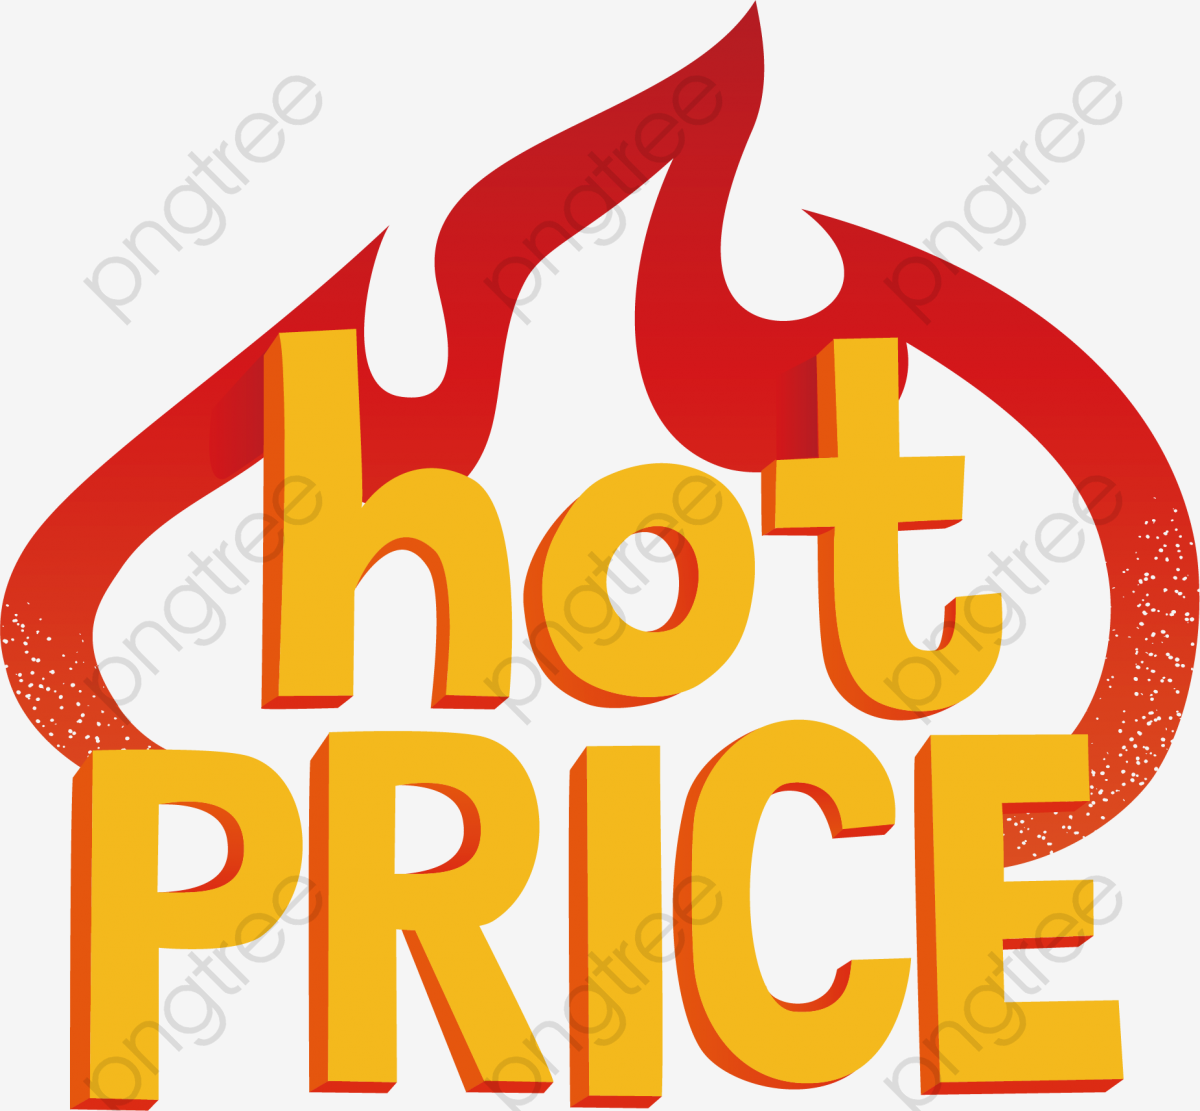 Hot Promotional Price, Vector Material, Flame, Fire PNG and Vector.